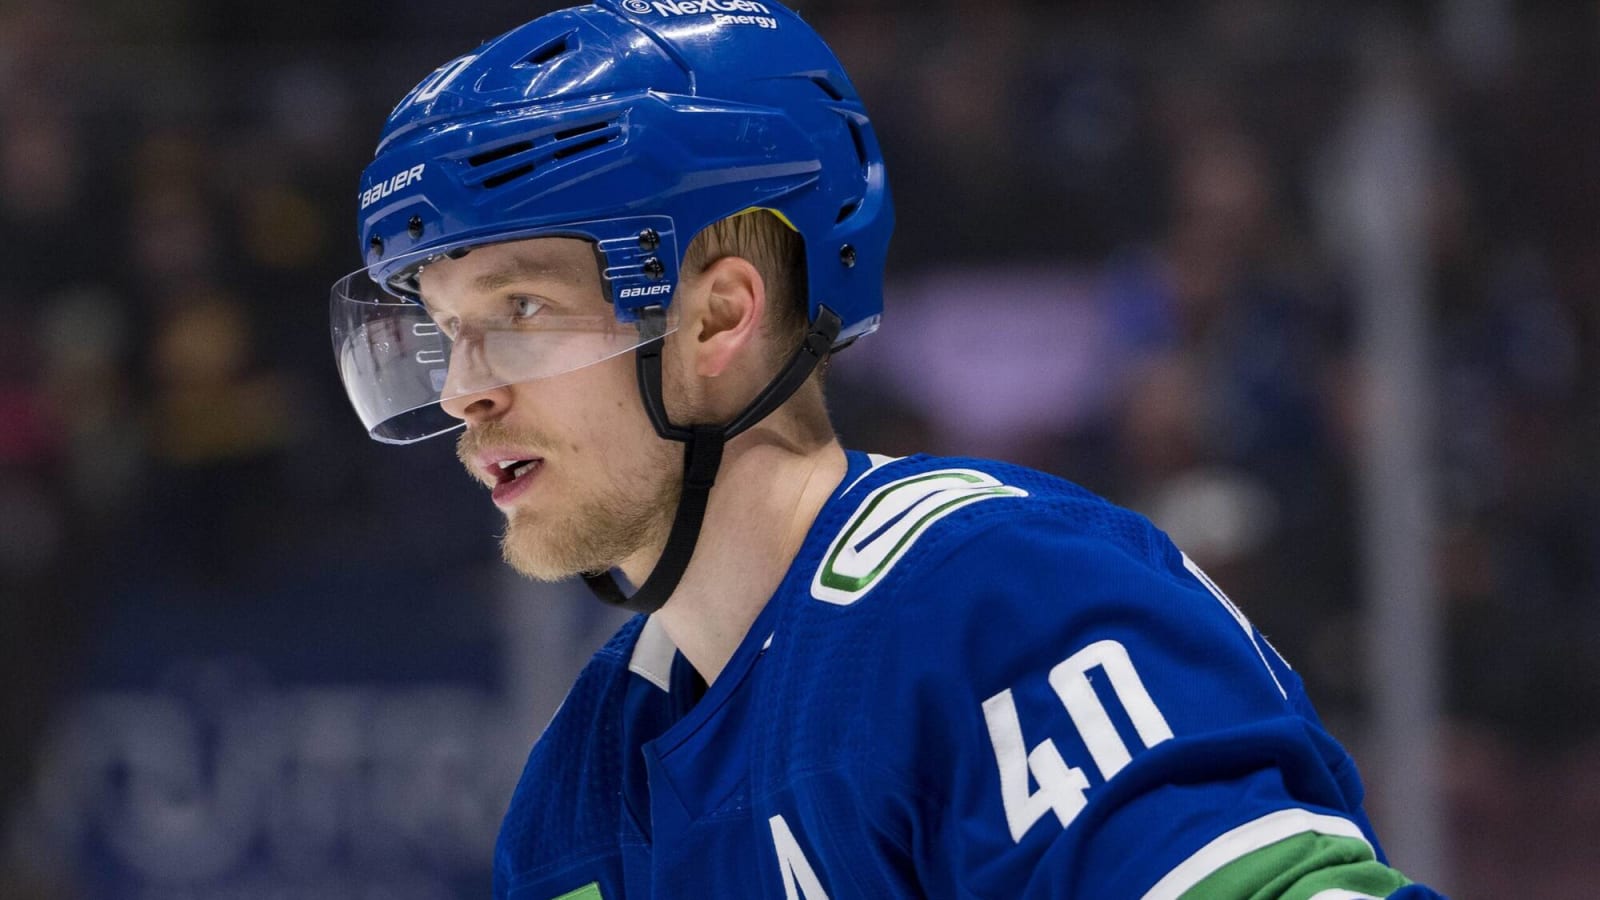 Report: Canucks star Elias Pettersson agrees to represent Sweden at World Championship